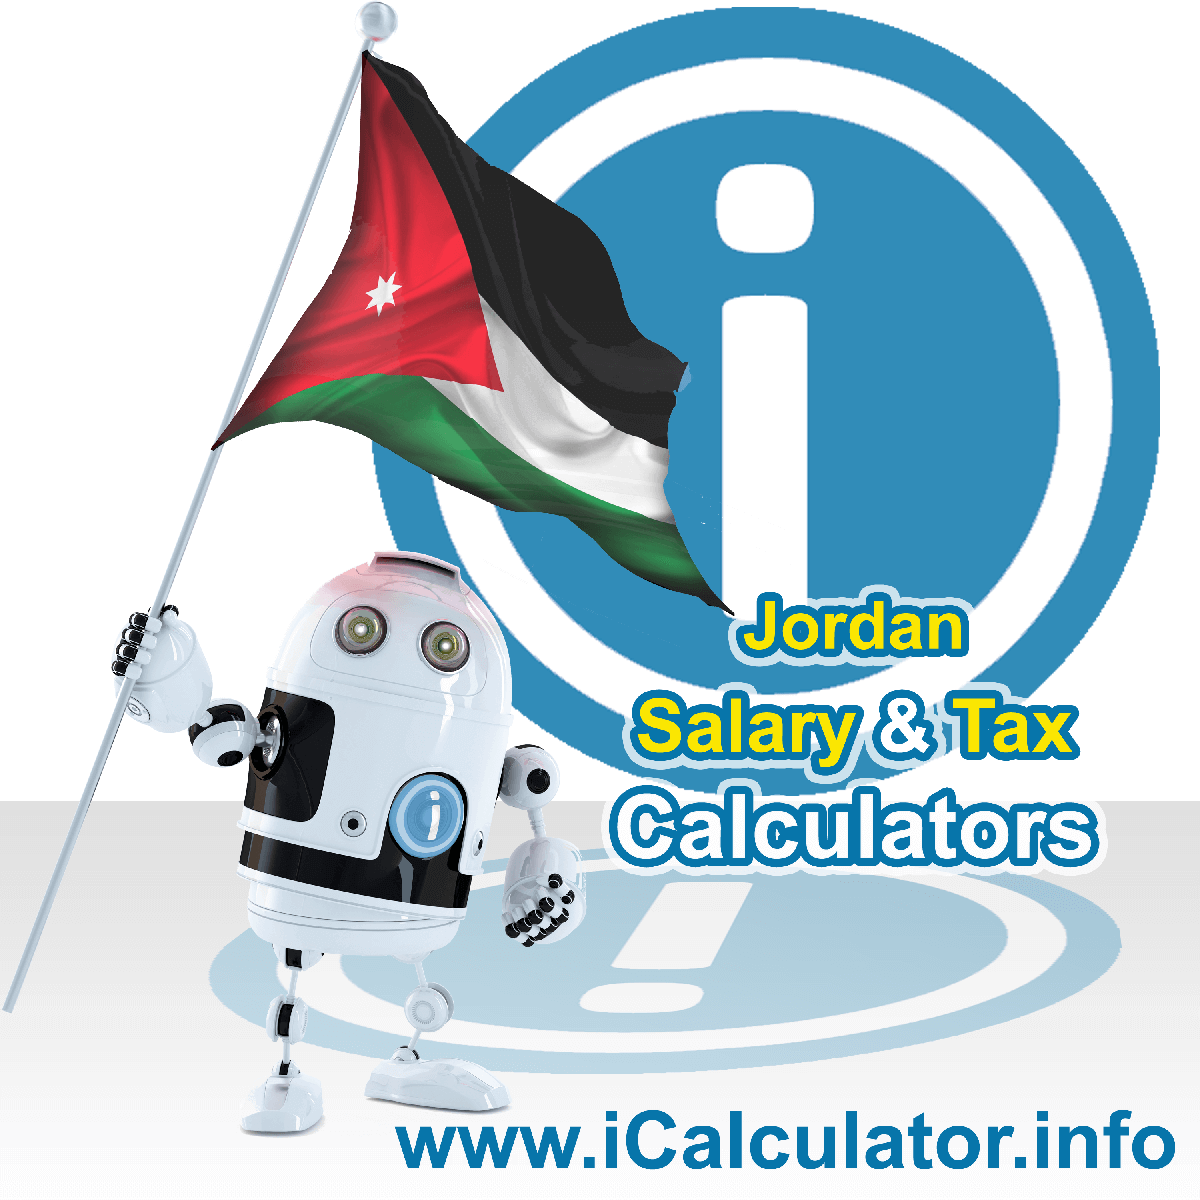 Jordan Wage Calculator. This image shows the Jordan flag and information relating to the tax formula for the Jordan Tax Calculator